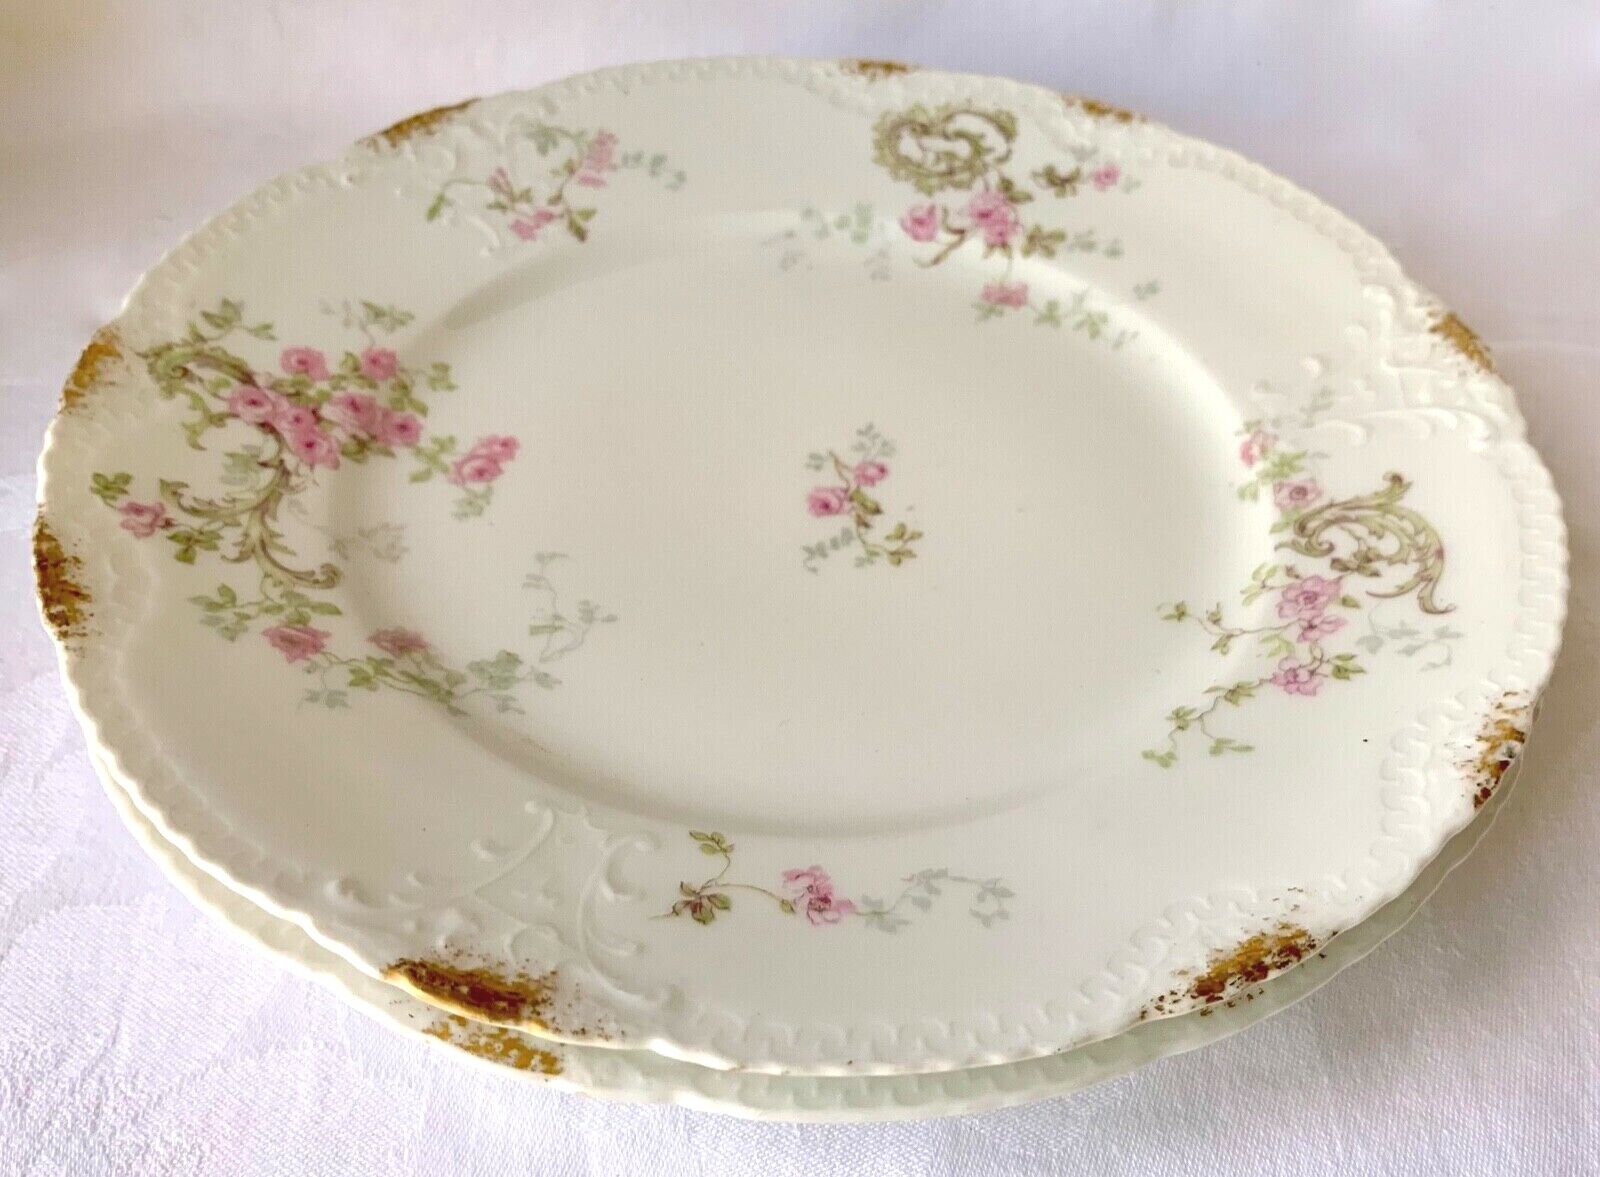 2 THEODORE HAVILAND LIMOGES LUNCH PLATES, SCHLEIGER 144, PINK ROSES, GOLD DAUBS